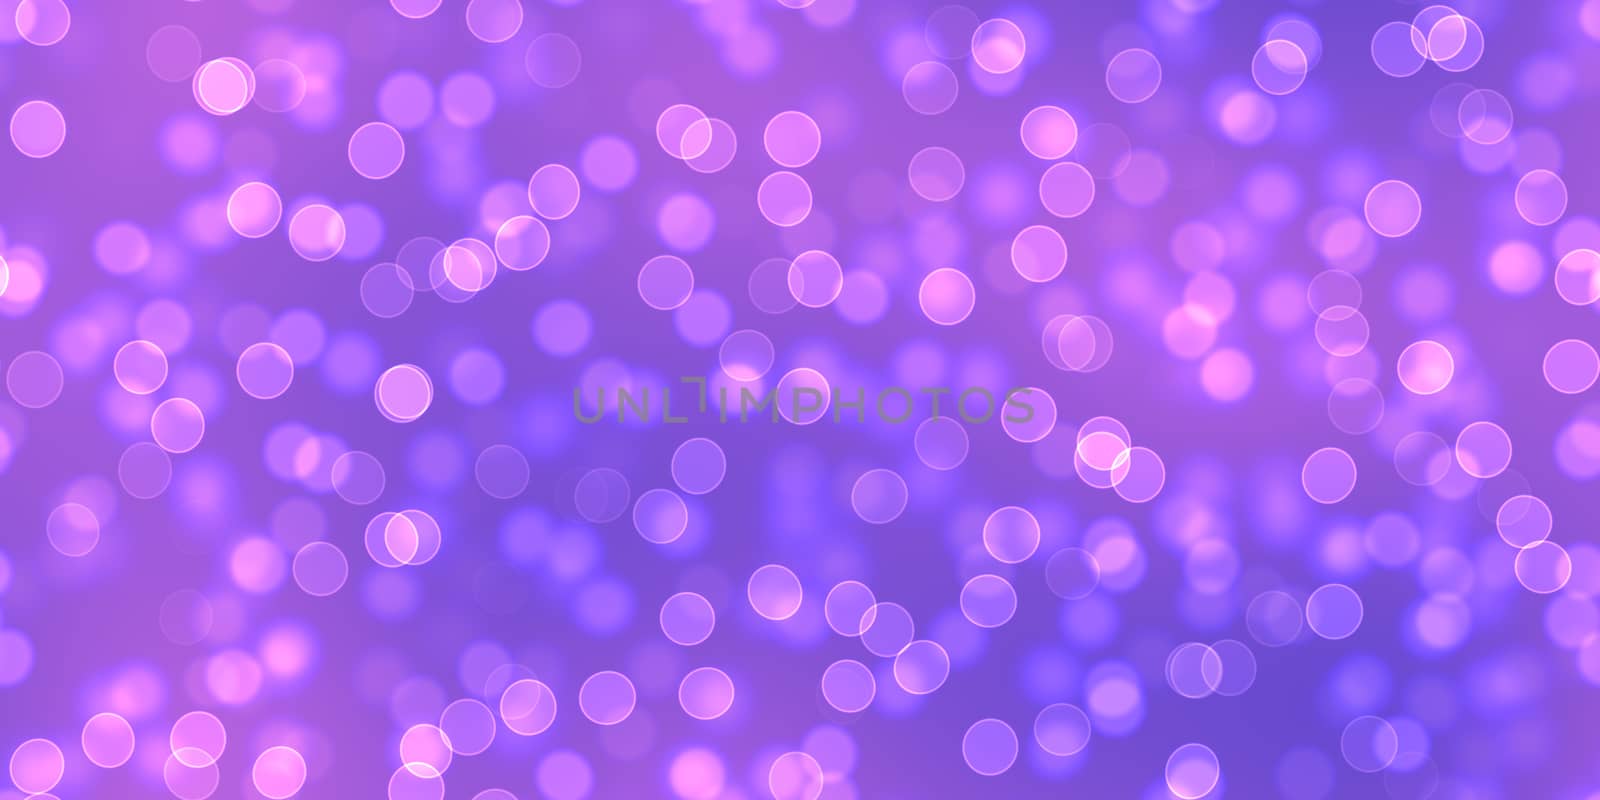 Lilac Bright Bokeh Background. Glowing Lights Texture. Shine Celebration Backdrop. by sanches812